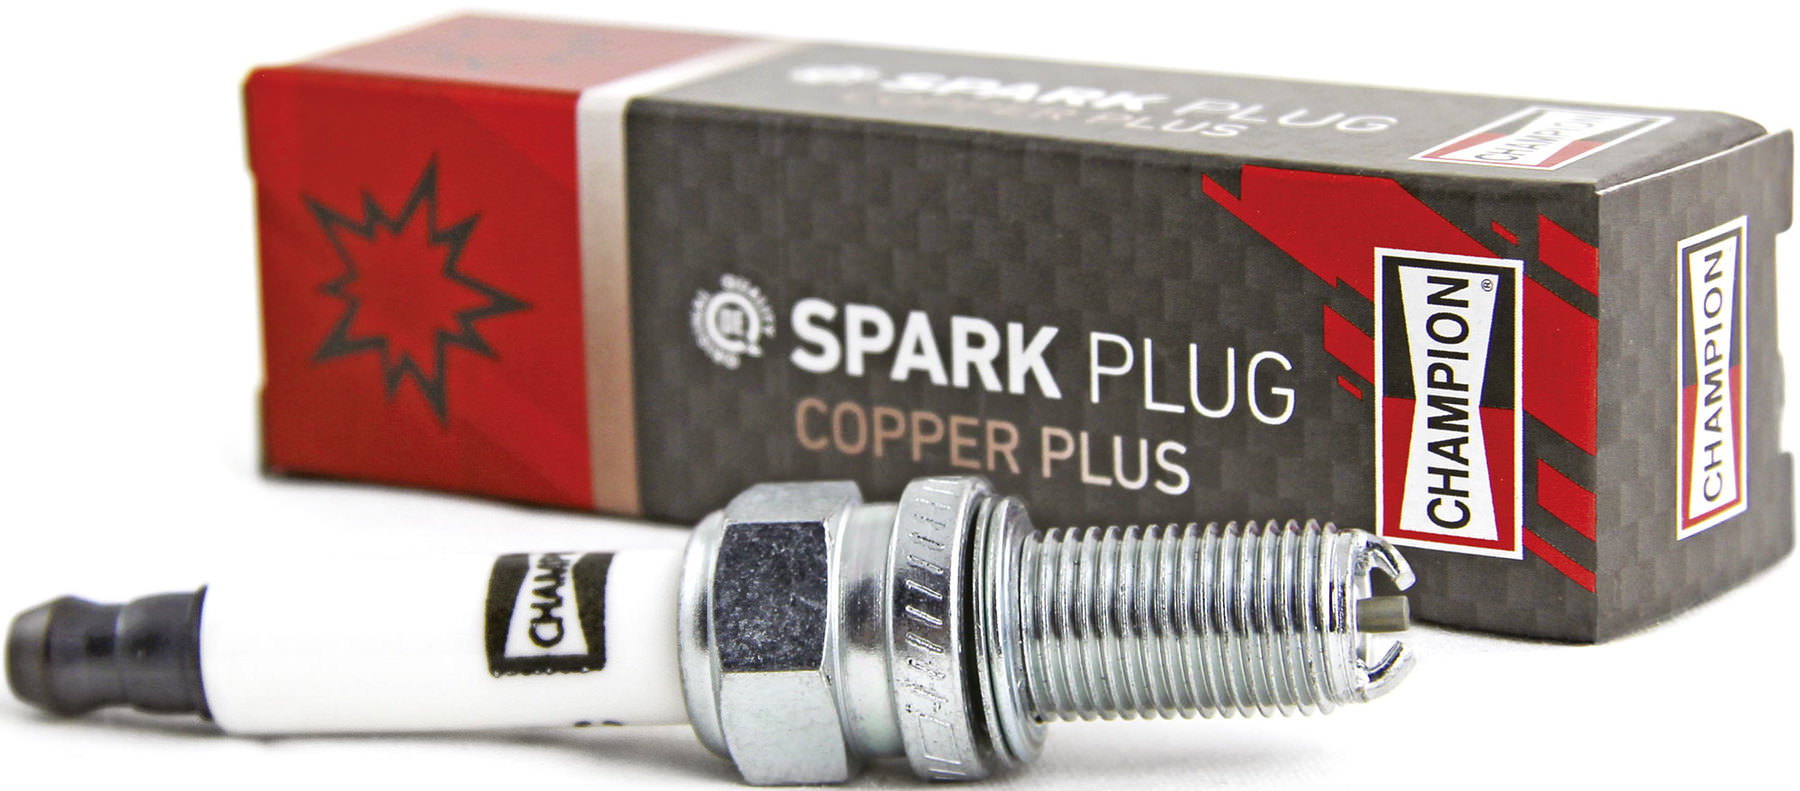 Procent Ære Tilstand Buy SPARK PLUG CHAMPION L82C | Louis motorcycle clothing and technology